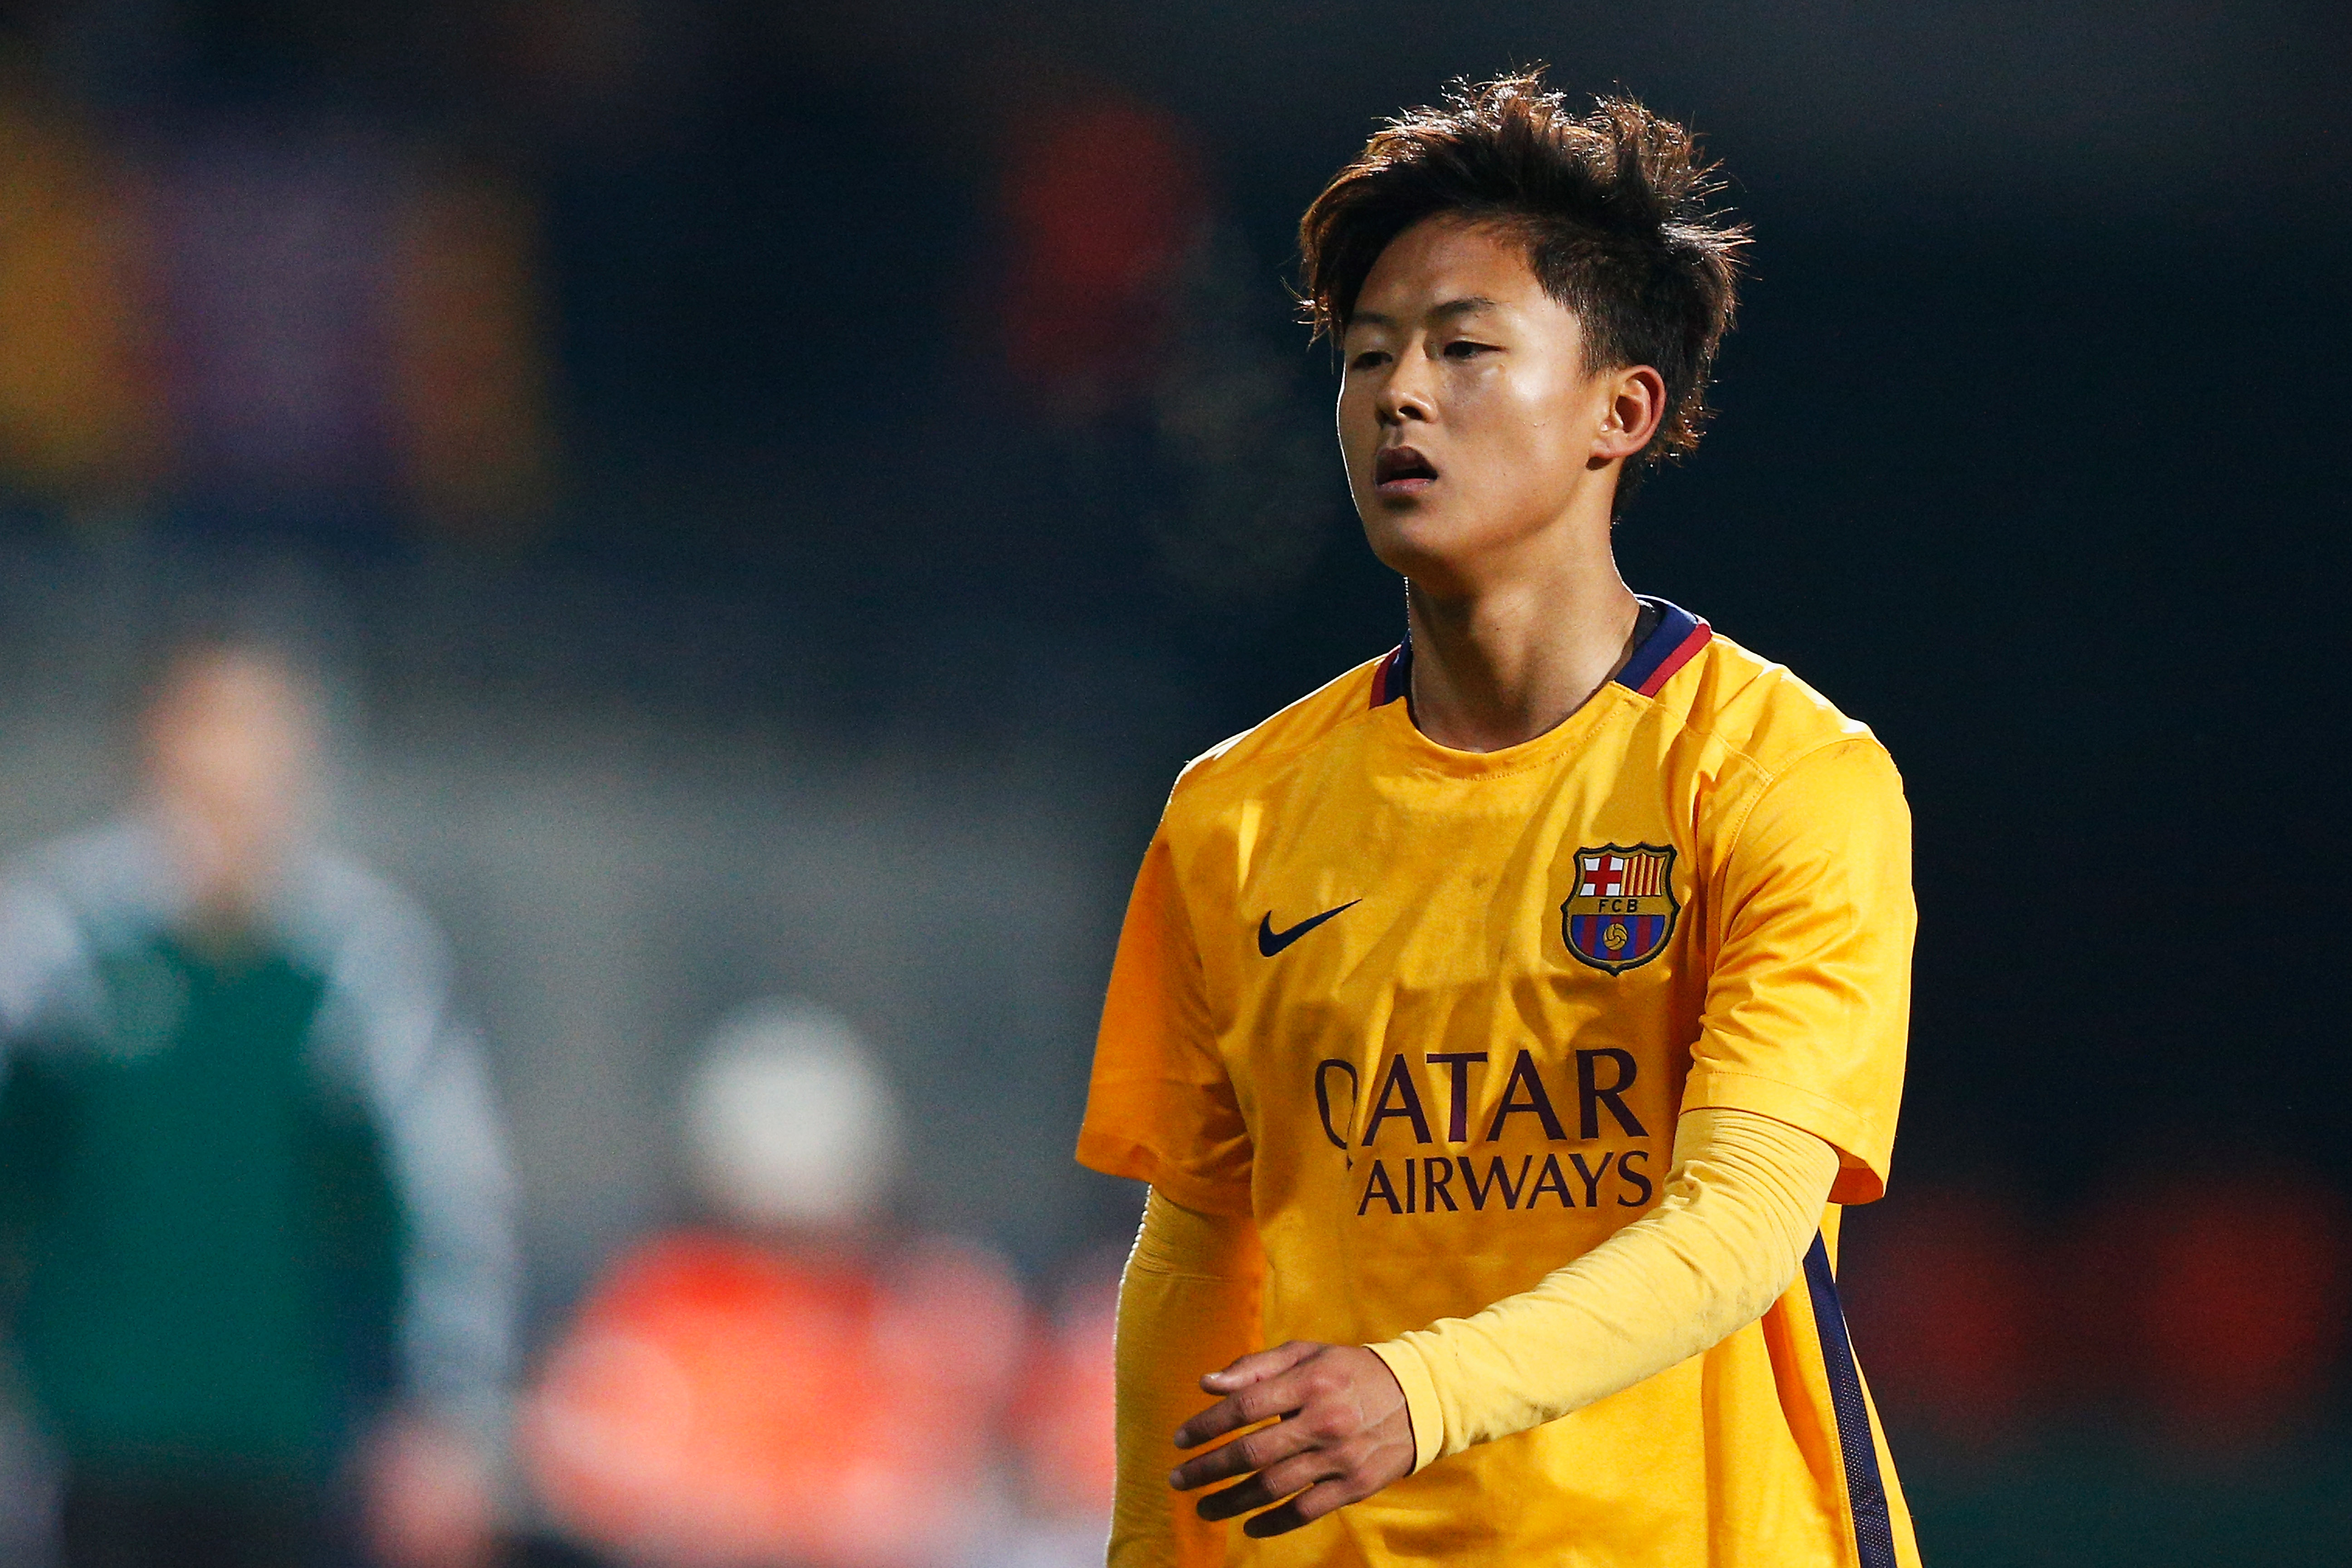 DENDERLEEUW, BELGIUM - MARCH 08:  Seungwoo Lee of Barcelona looks on during the UEFA Youth League Quarter-final match between Anderlecht and Barcelona held at Van Roy Stadium on March 8, 2016 in Denderleeuw, Belgium.  (Photo by Dean Mouhtaropoulos/Getty Images)